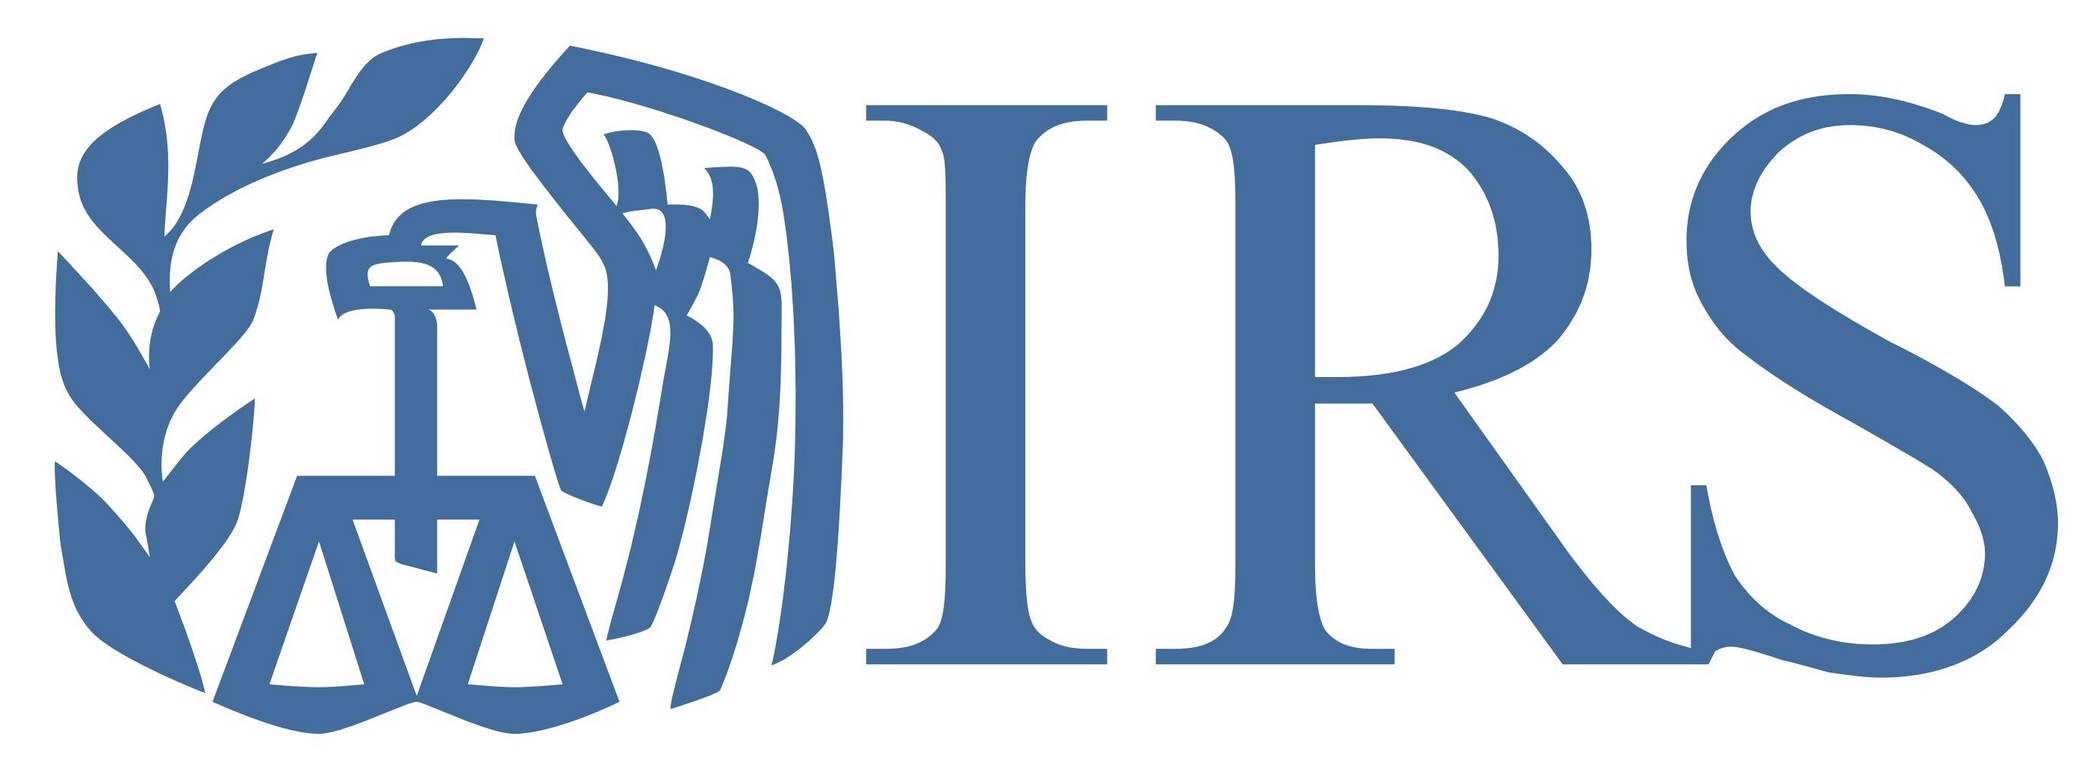 Irs Logo - Irs, Transparent background PNG HD thumbnail